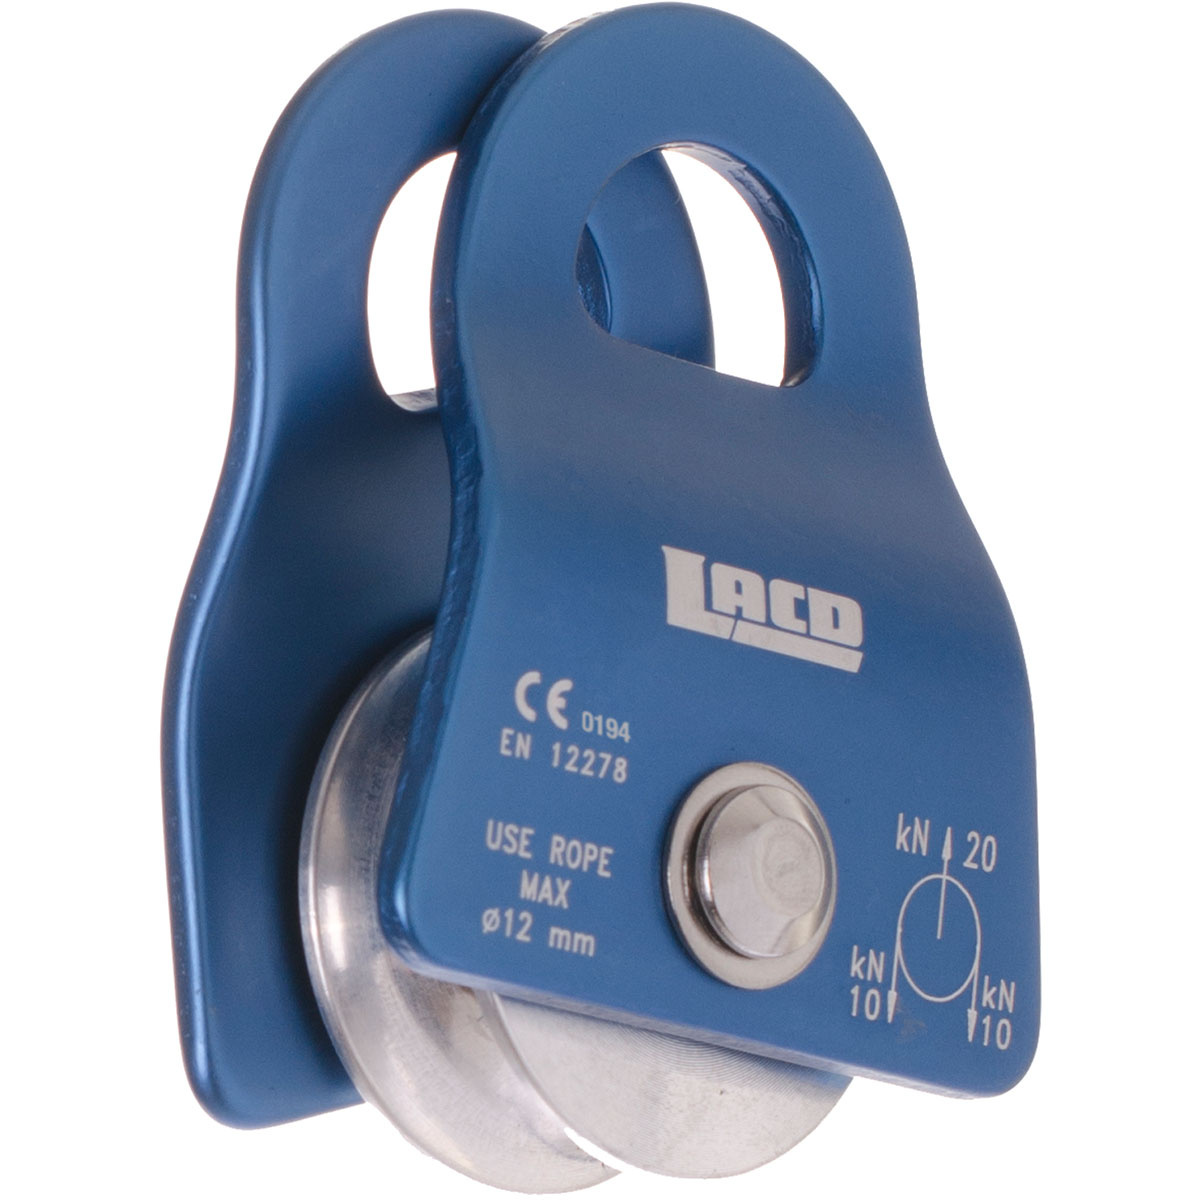 Image of LACD Carrucola Mobile Pulley small